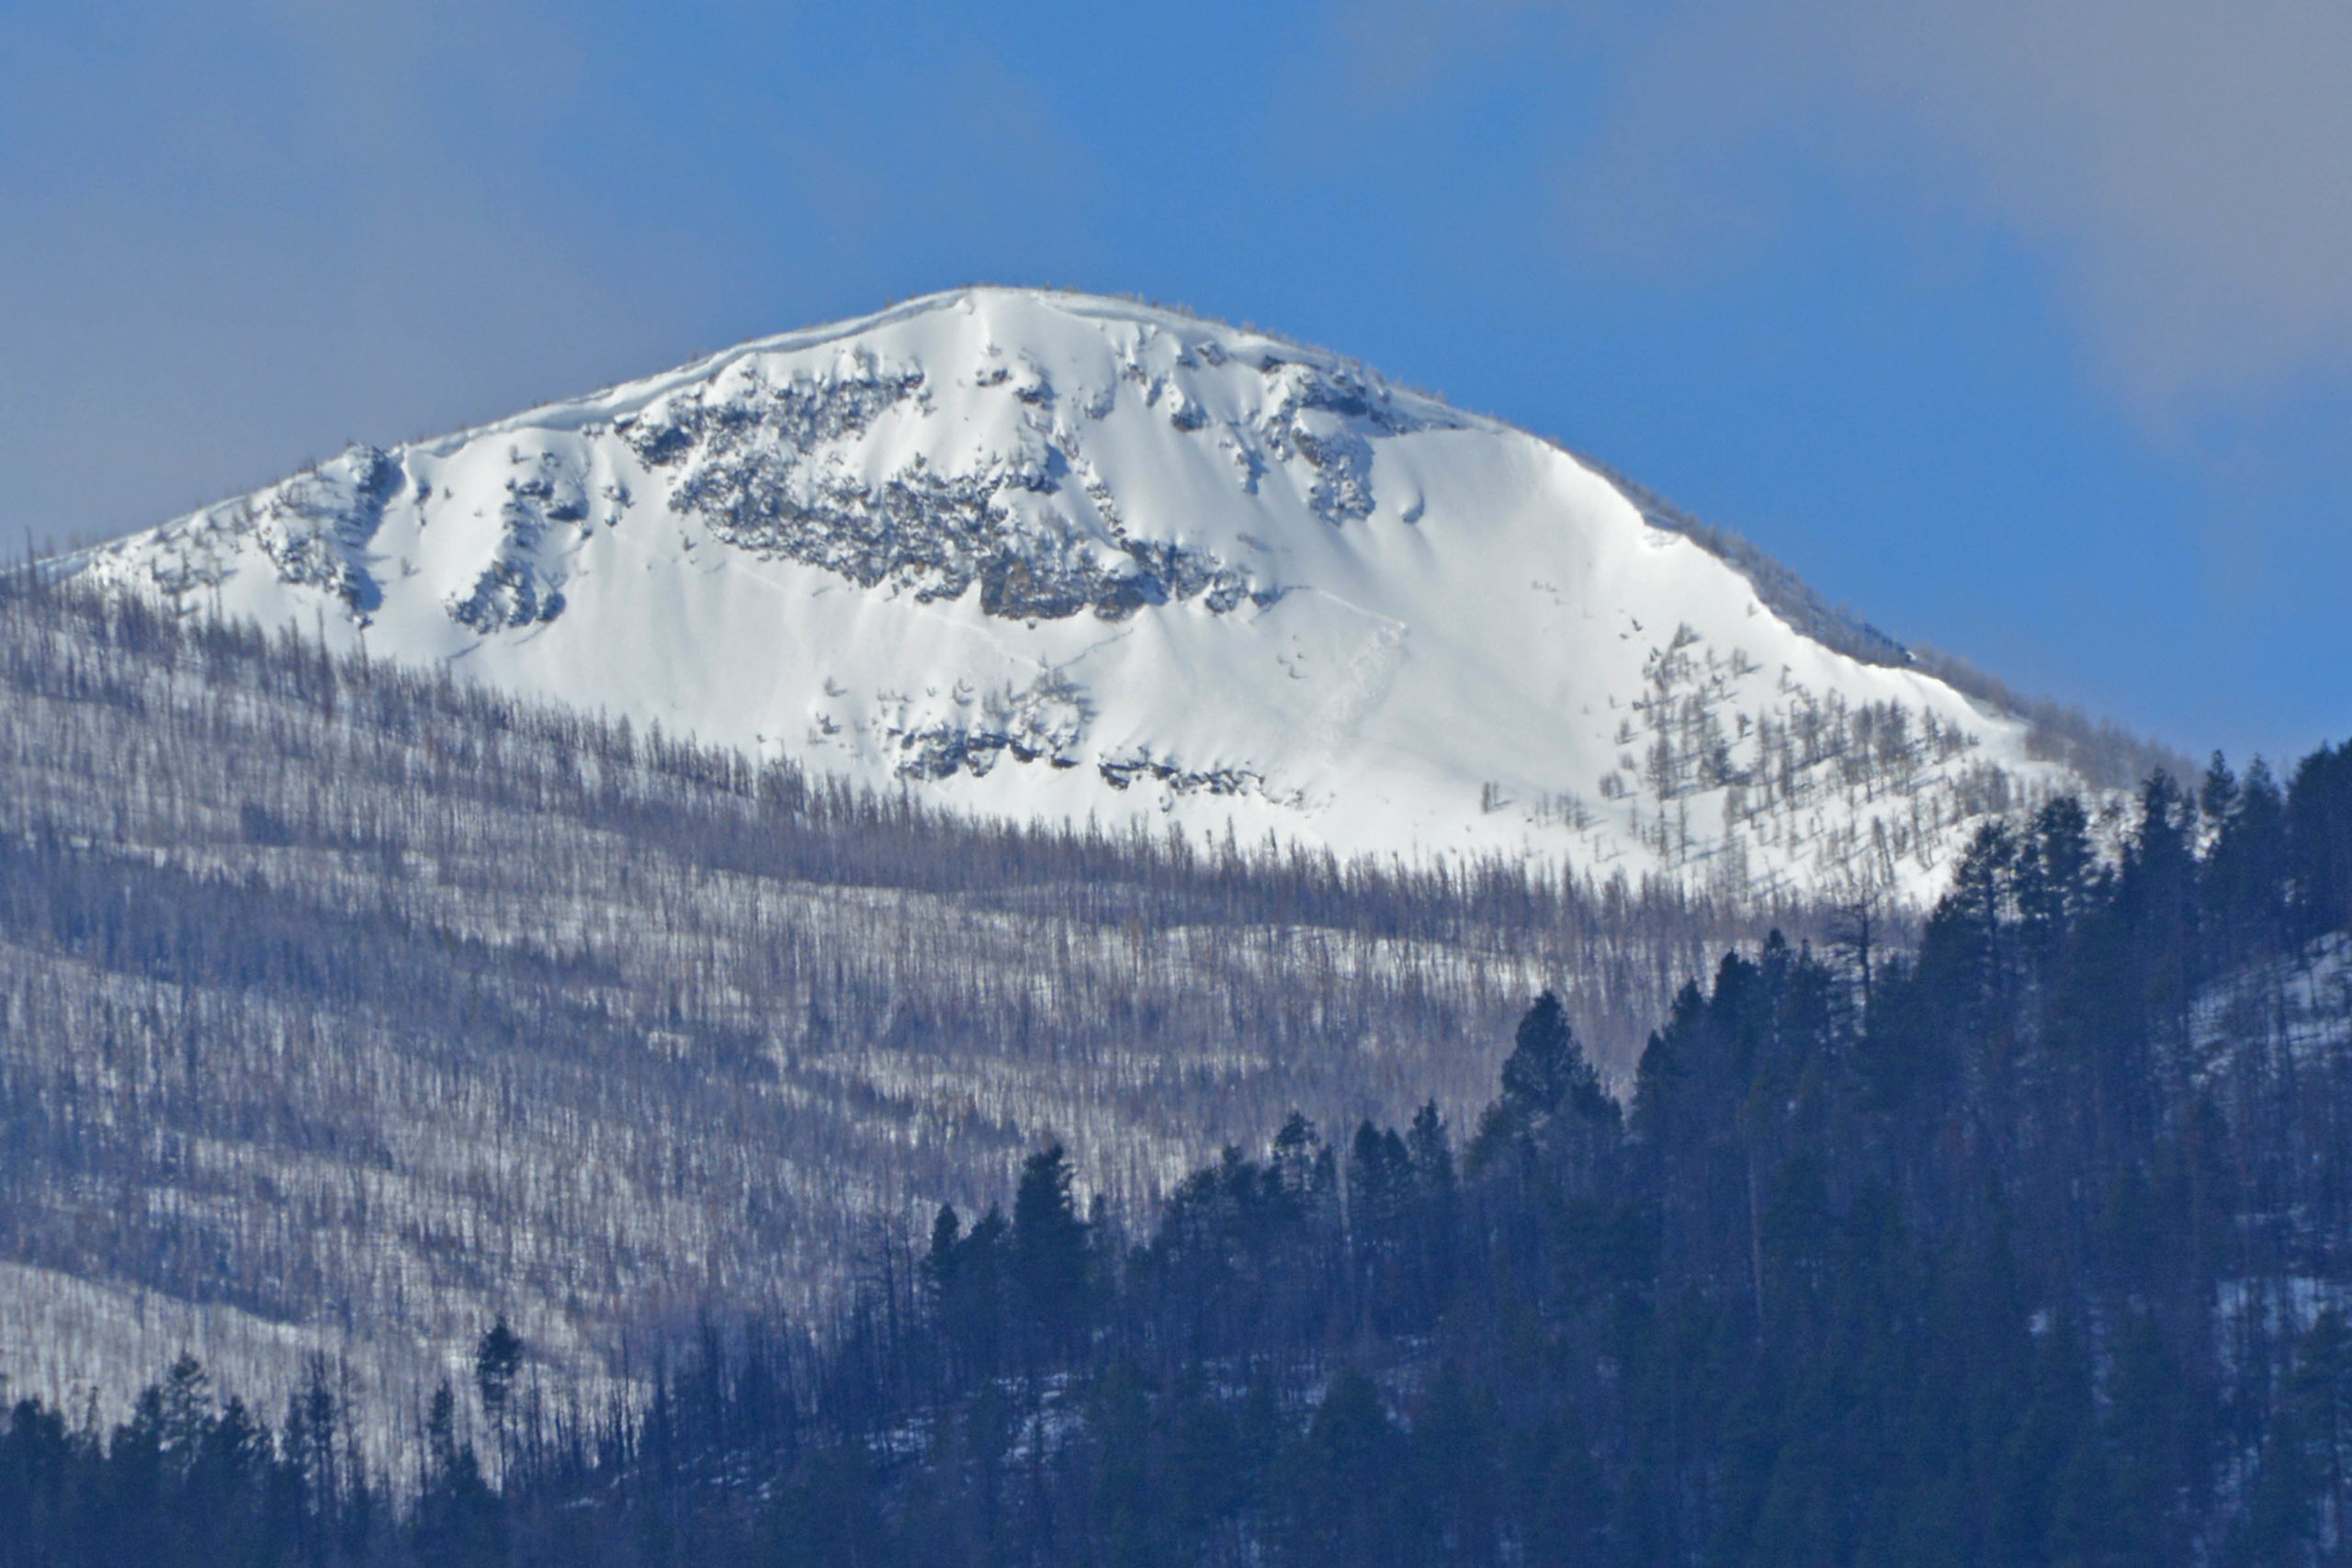 : <p>North Summit of Lolo Peak, photographed from Travelers’ Rest on 4/6/22.</p>
